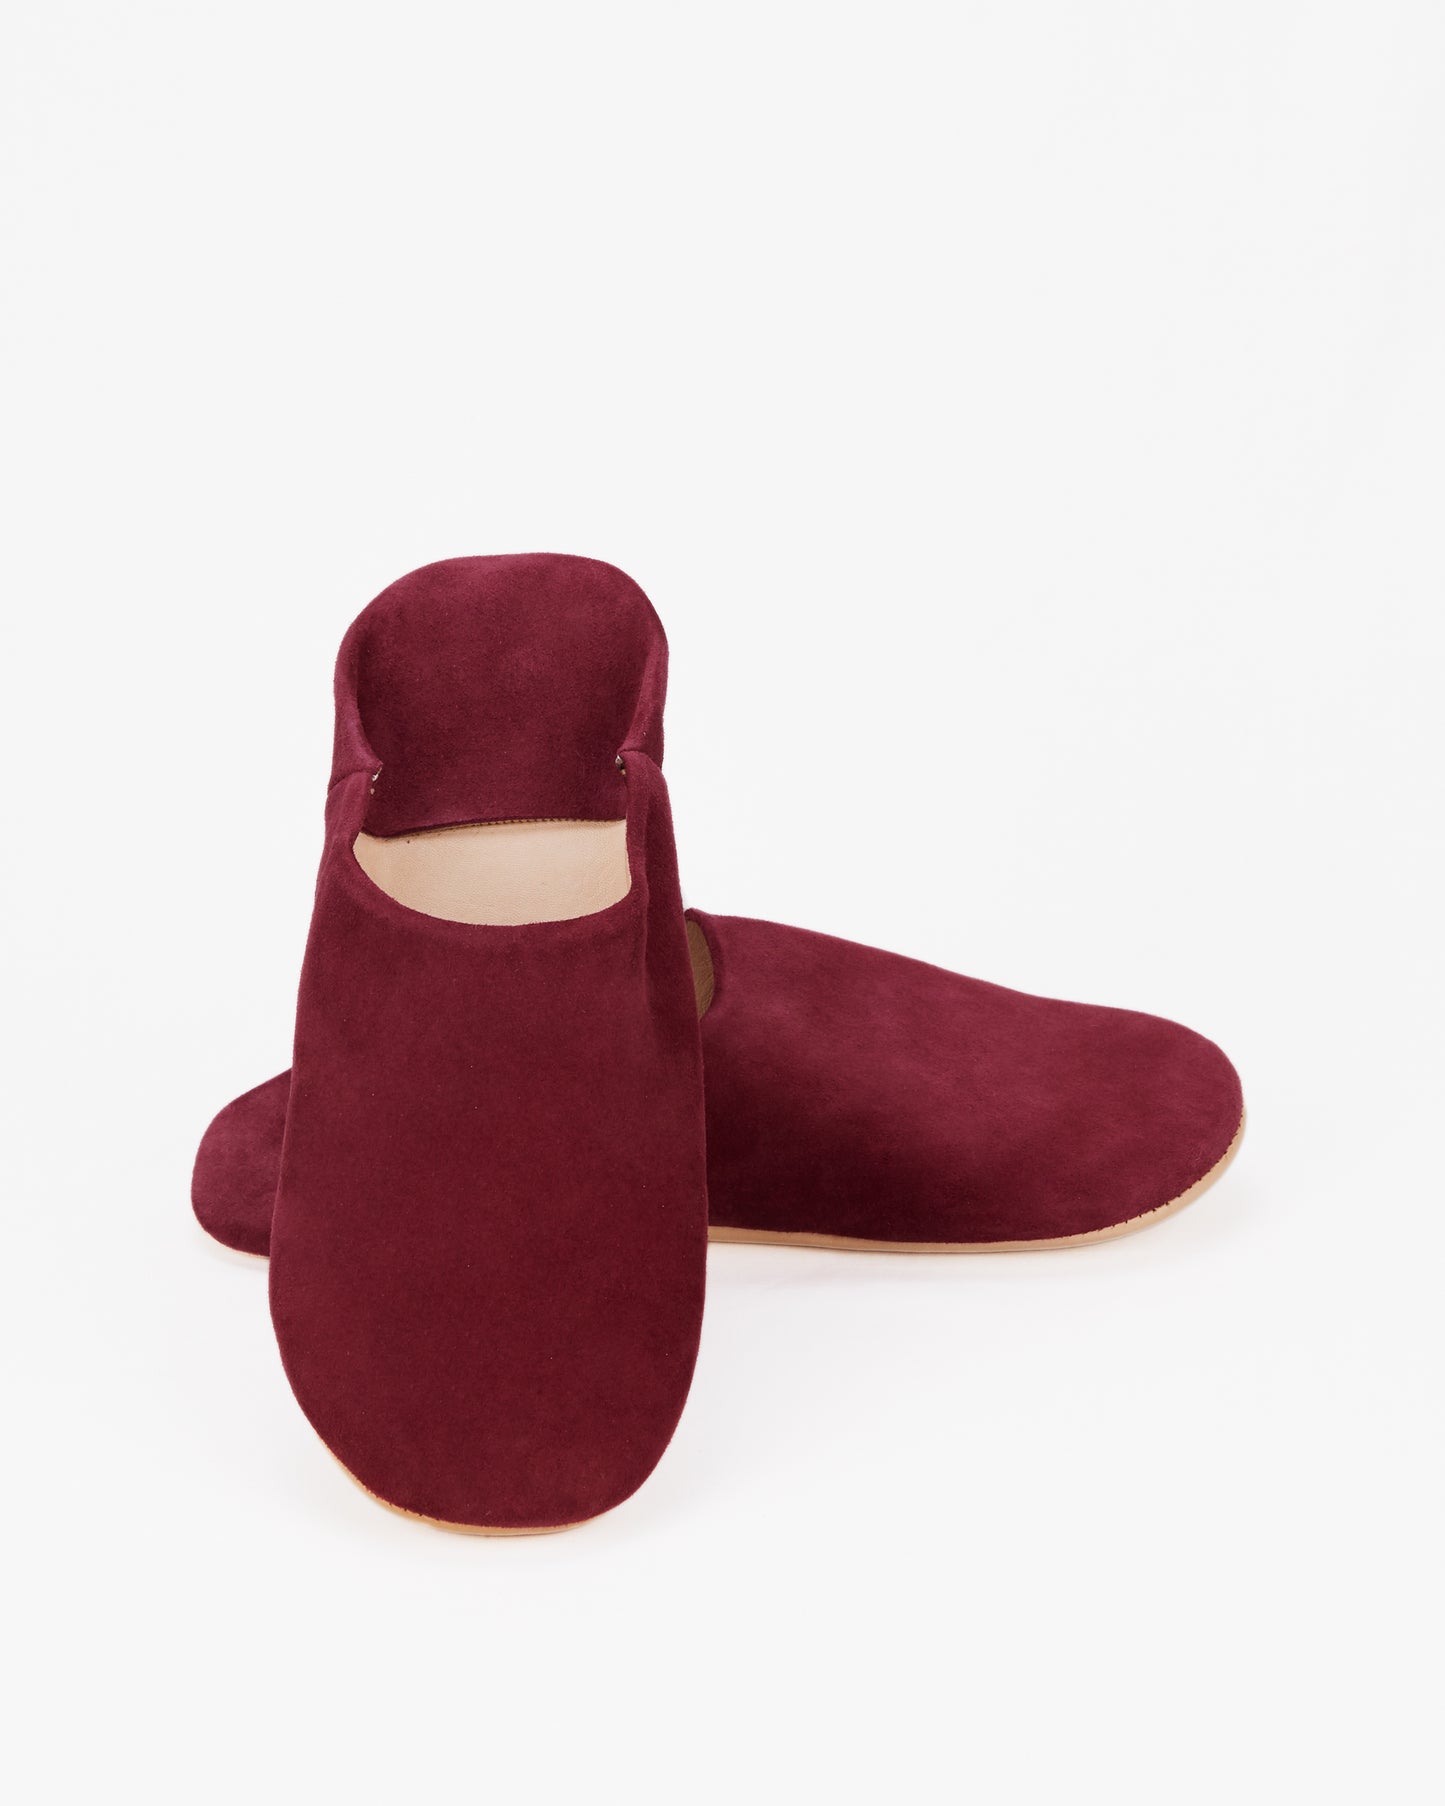 Moroccan Slippers, Red